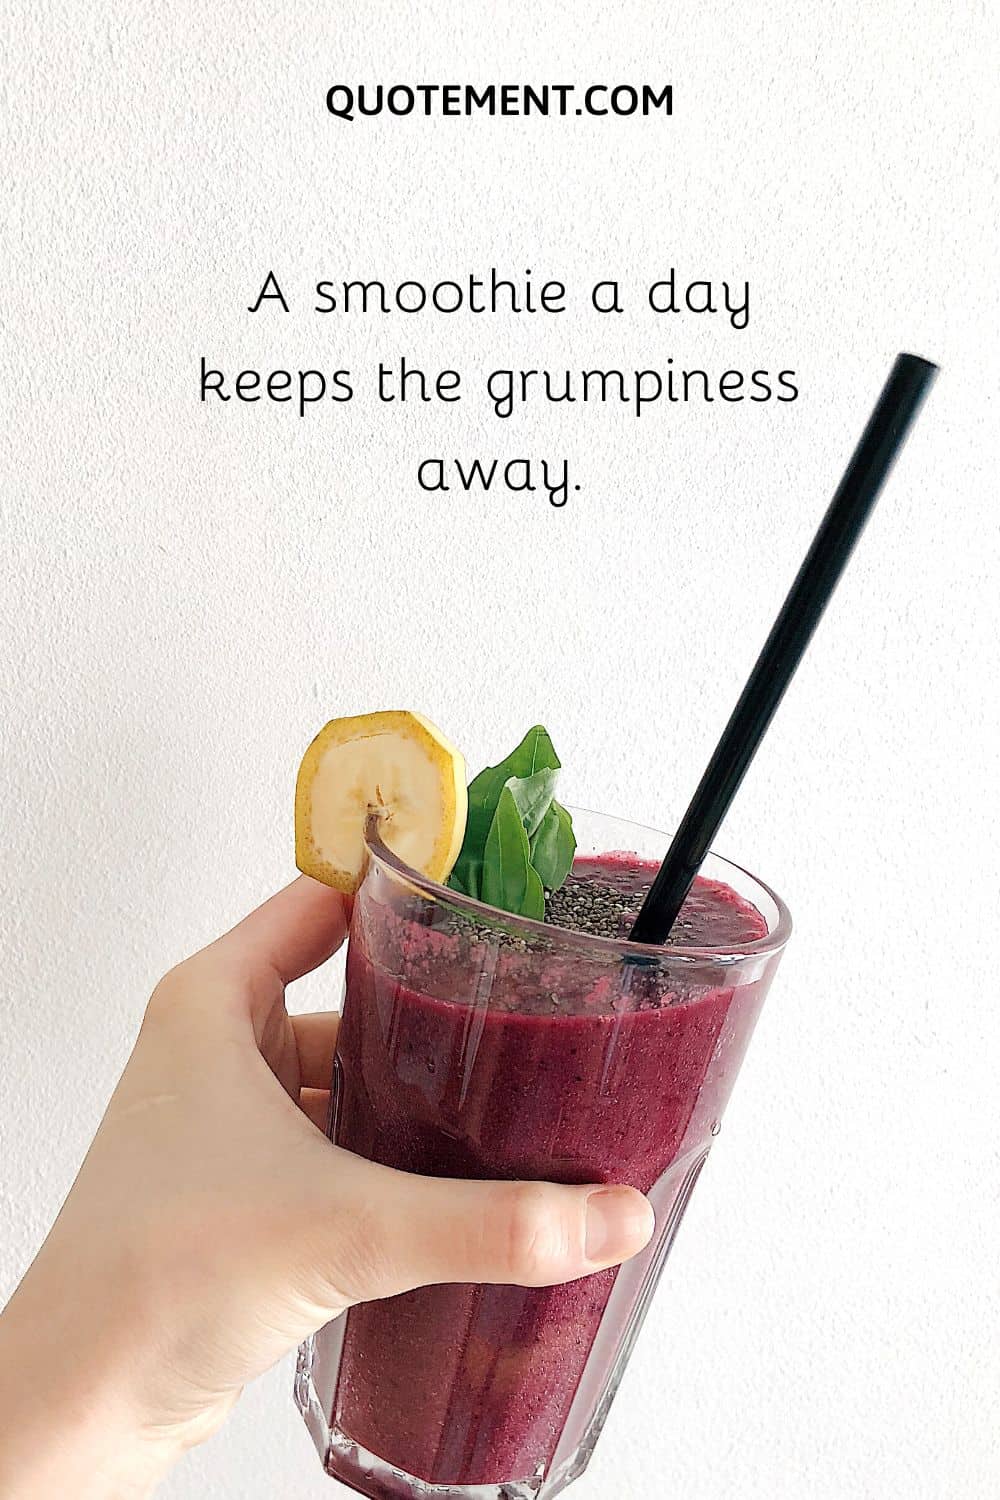 A smoothie a day keeps the grumpiness away.